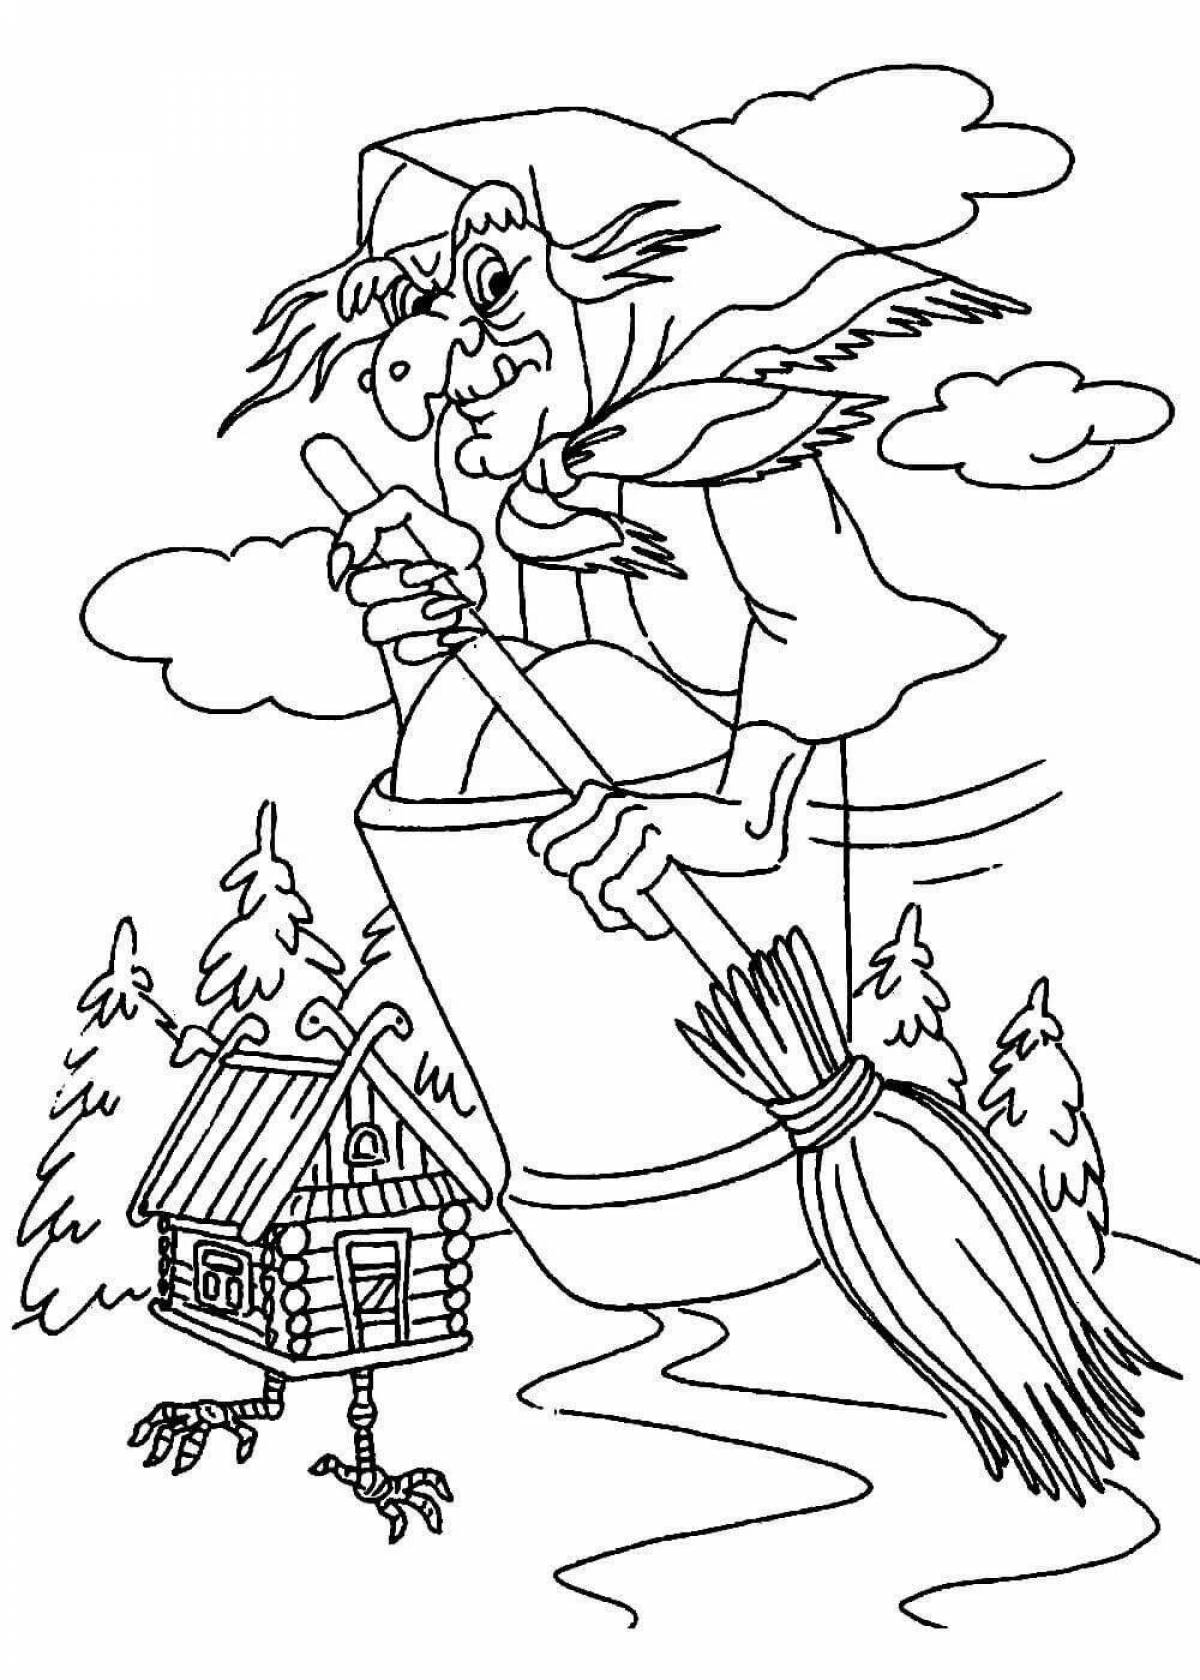 Amazing coloring pages heroes of Russian fairy tales